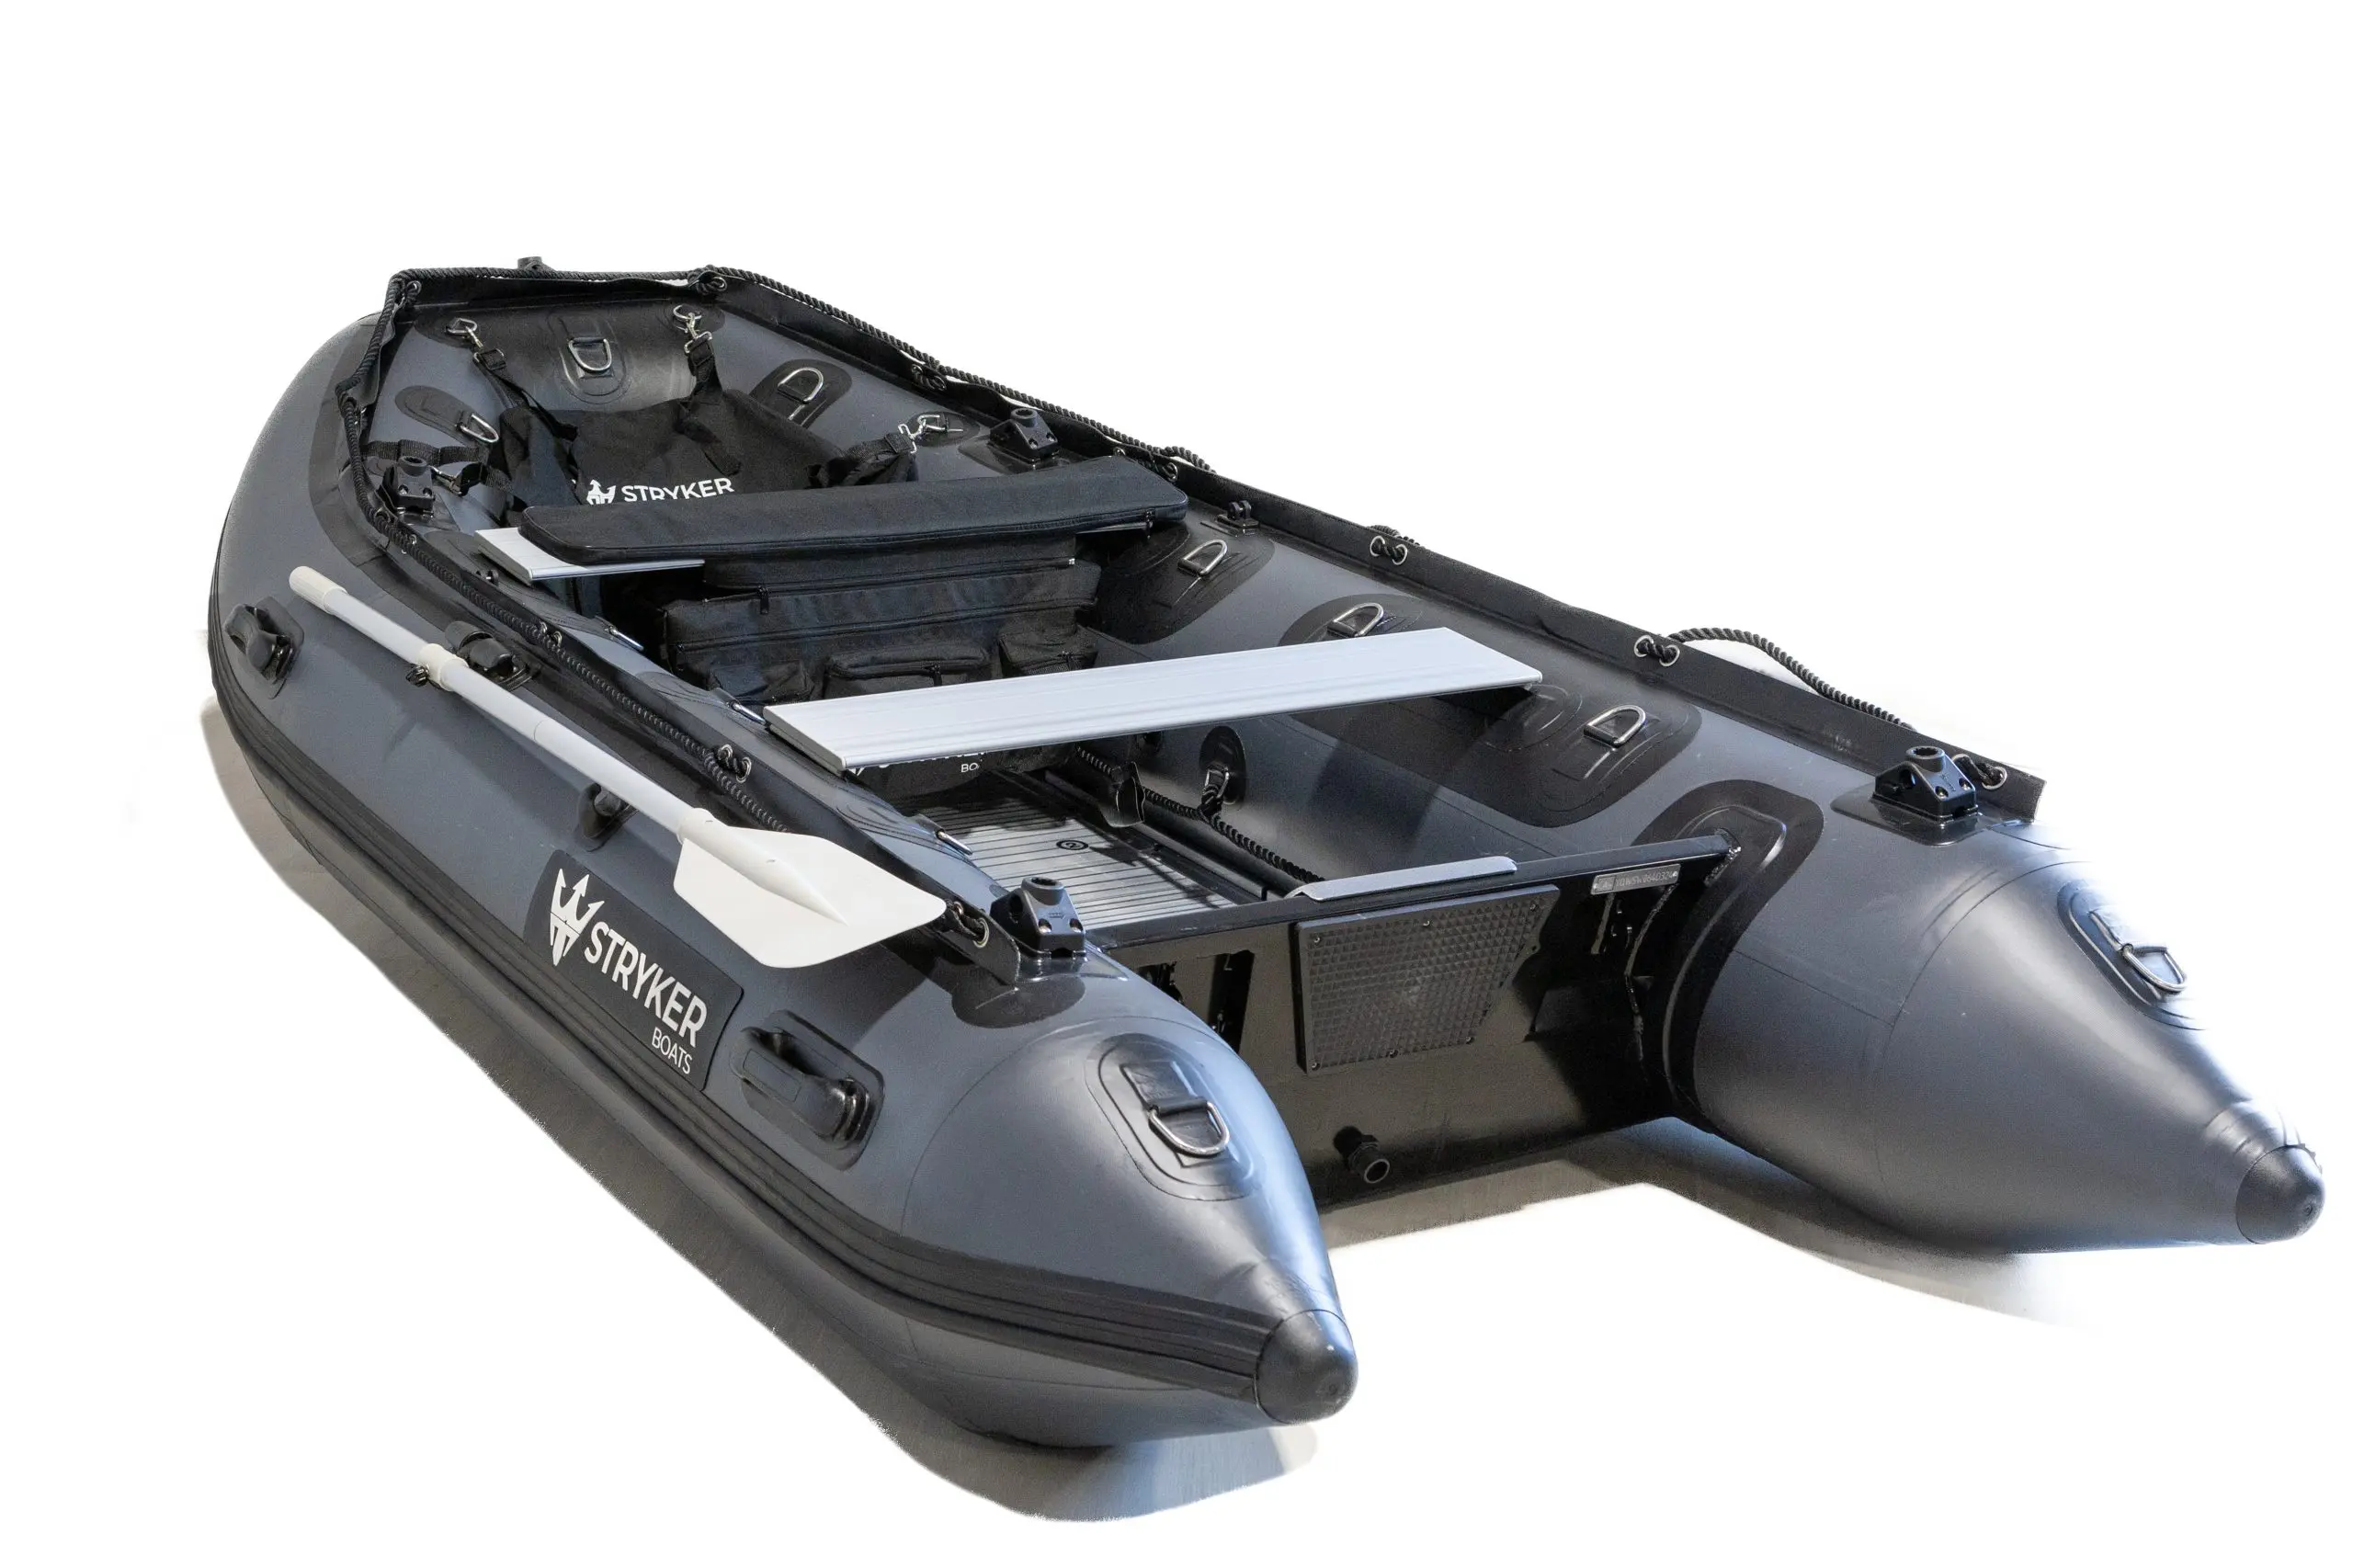 Inflatable Boats China, Cheap Inflatable Boat With Engine, High